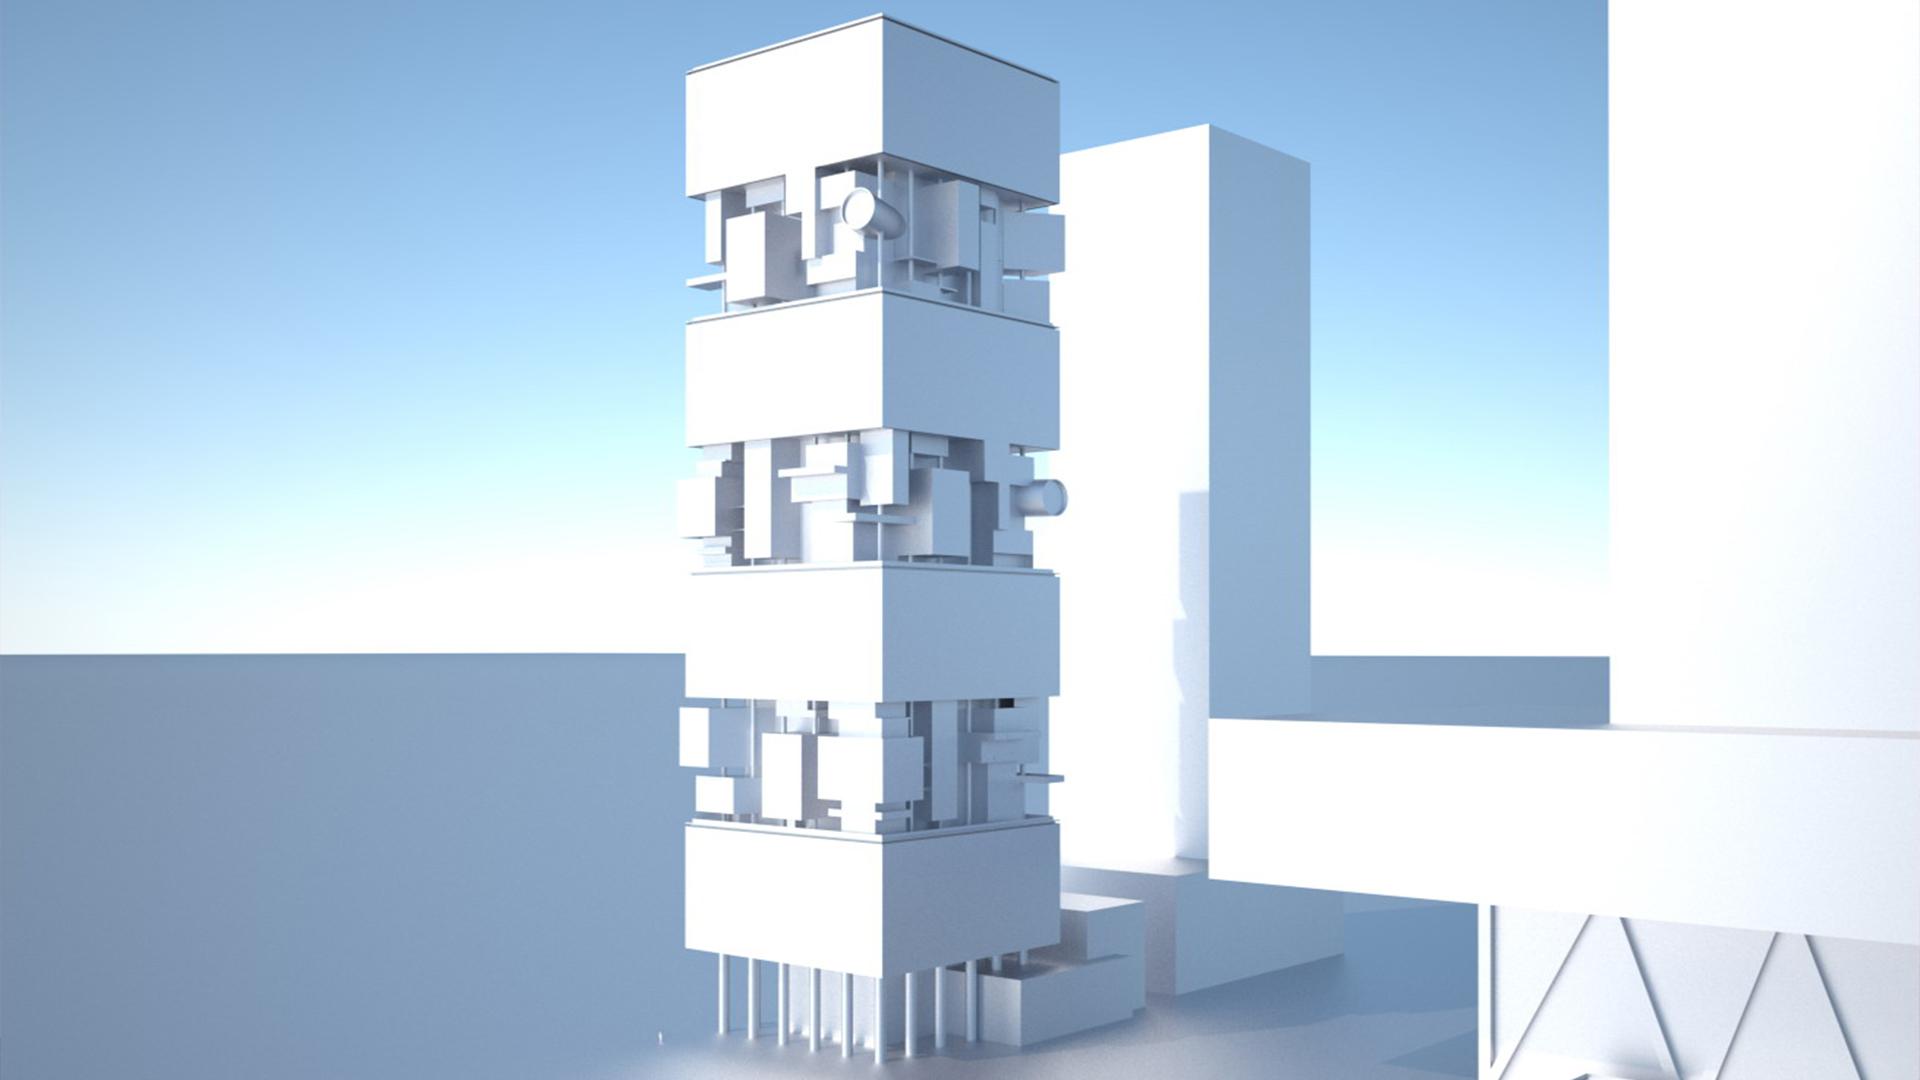 OHA - SBF TOWER 01 - Office For Heuristic Architecture